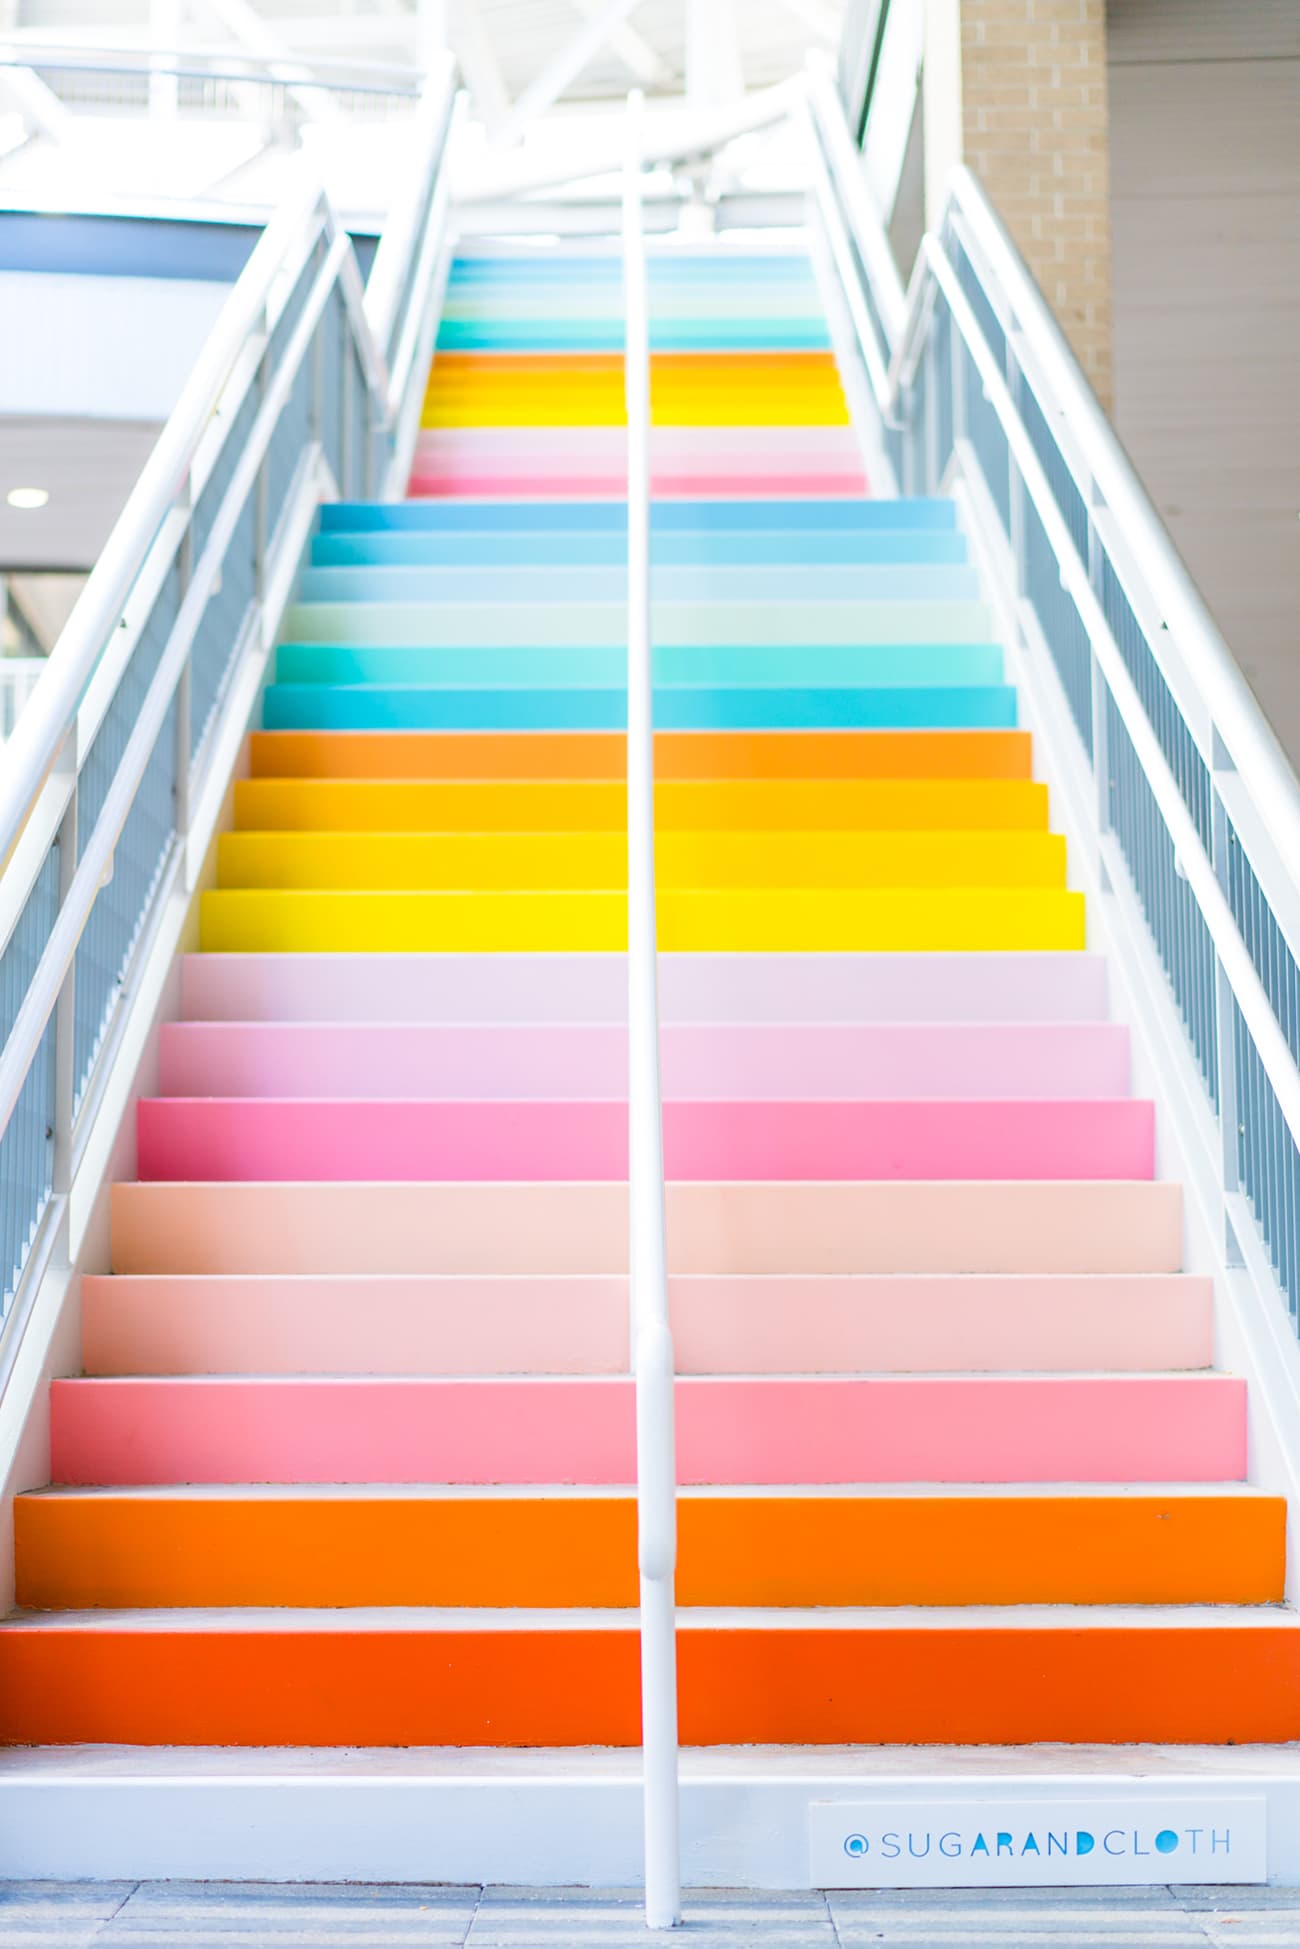 Stair Riser Ideas - Creative Ways to Decorate Your Stair Riser